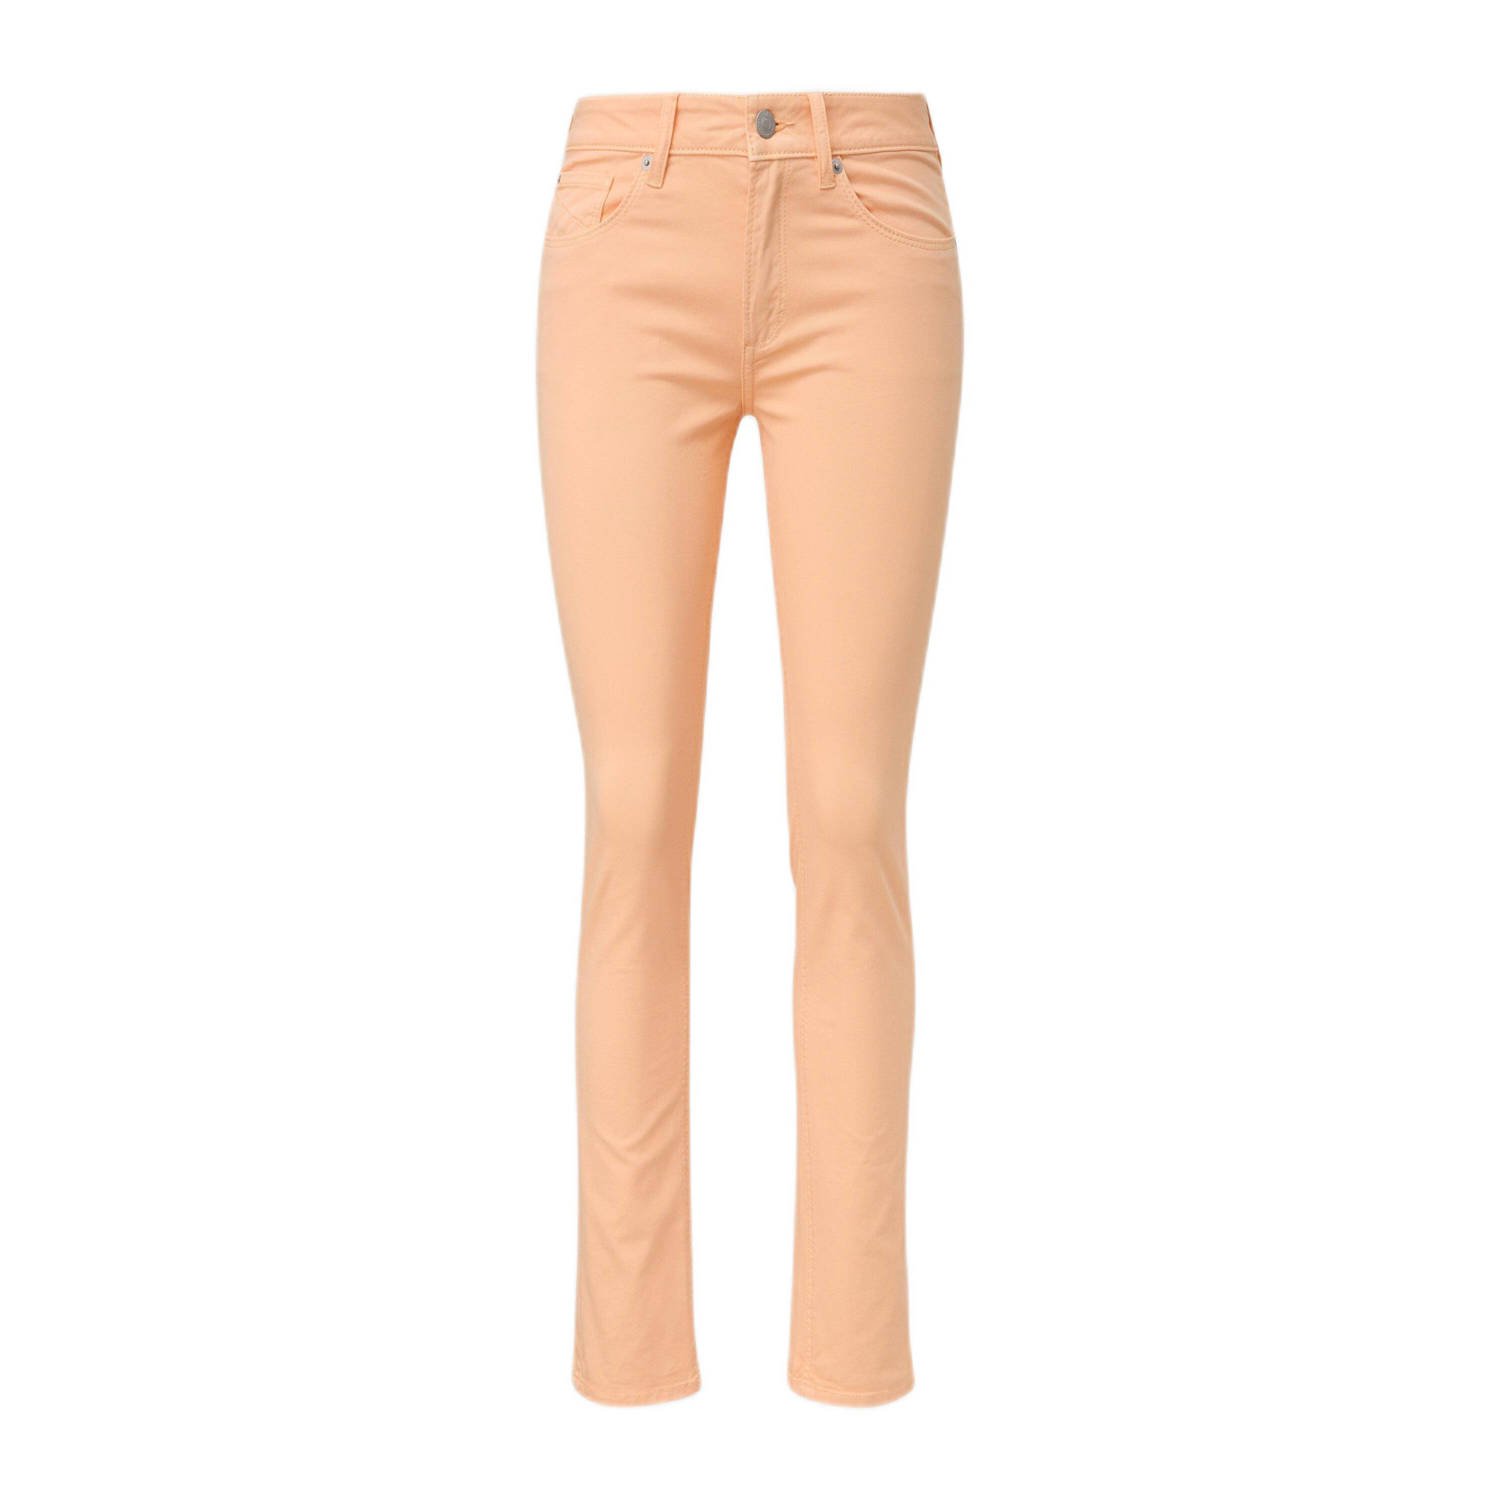 Q S by s.Oliver slim fit jeans zalm